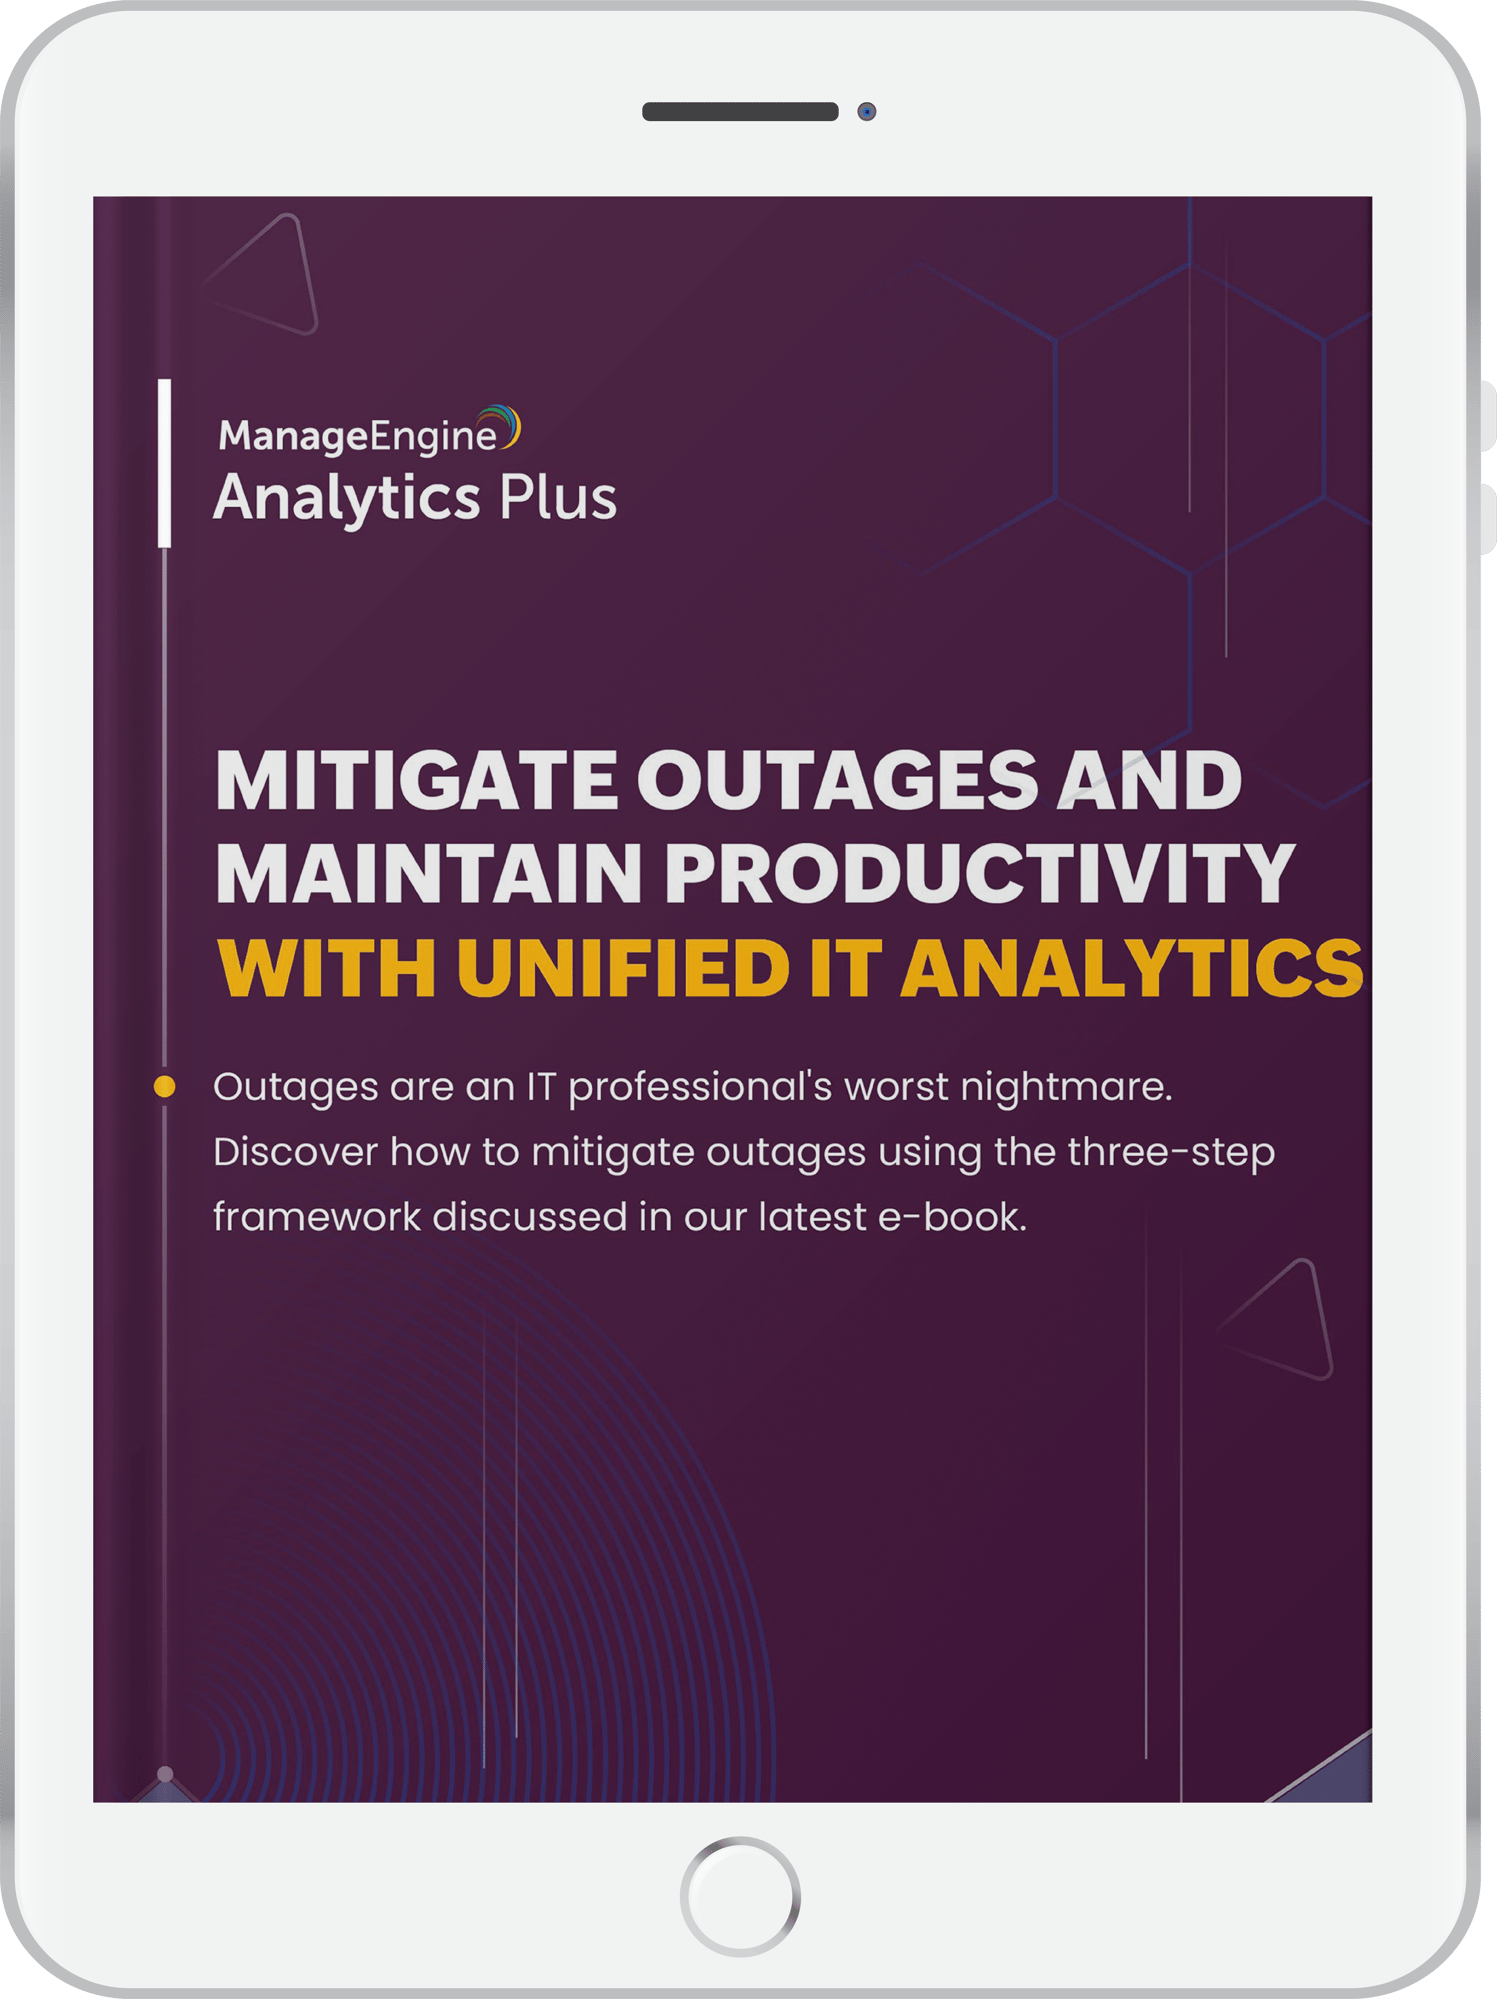 Ebook_ipad-cover_mitigate outages and maintain productivity with unified it analytics